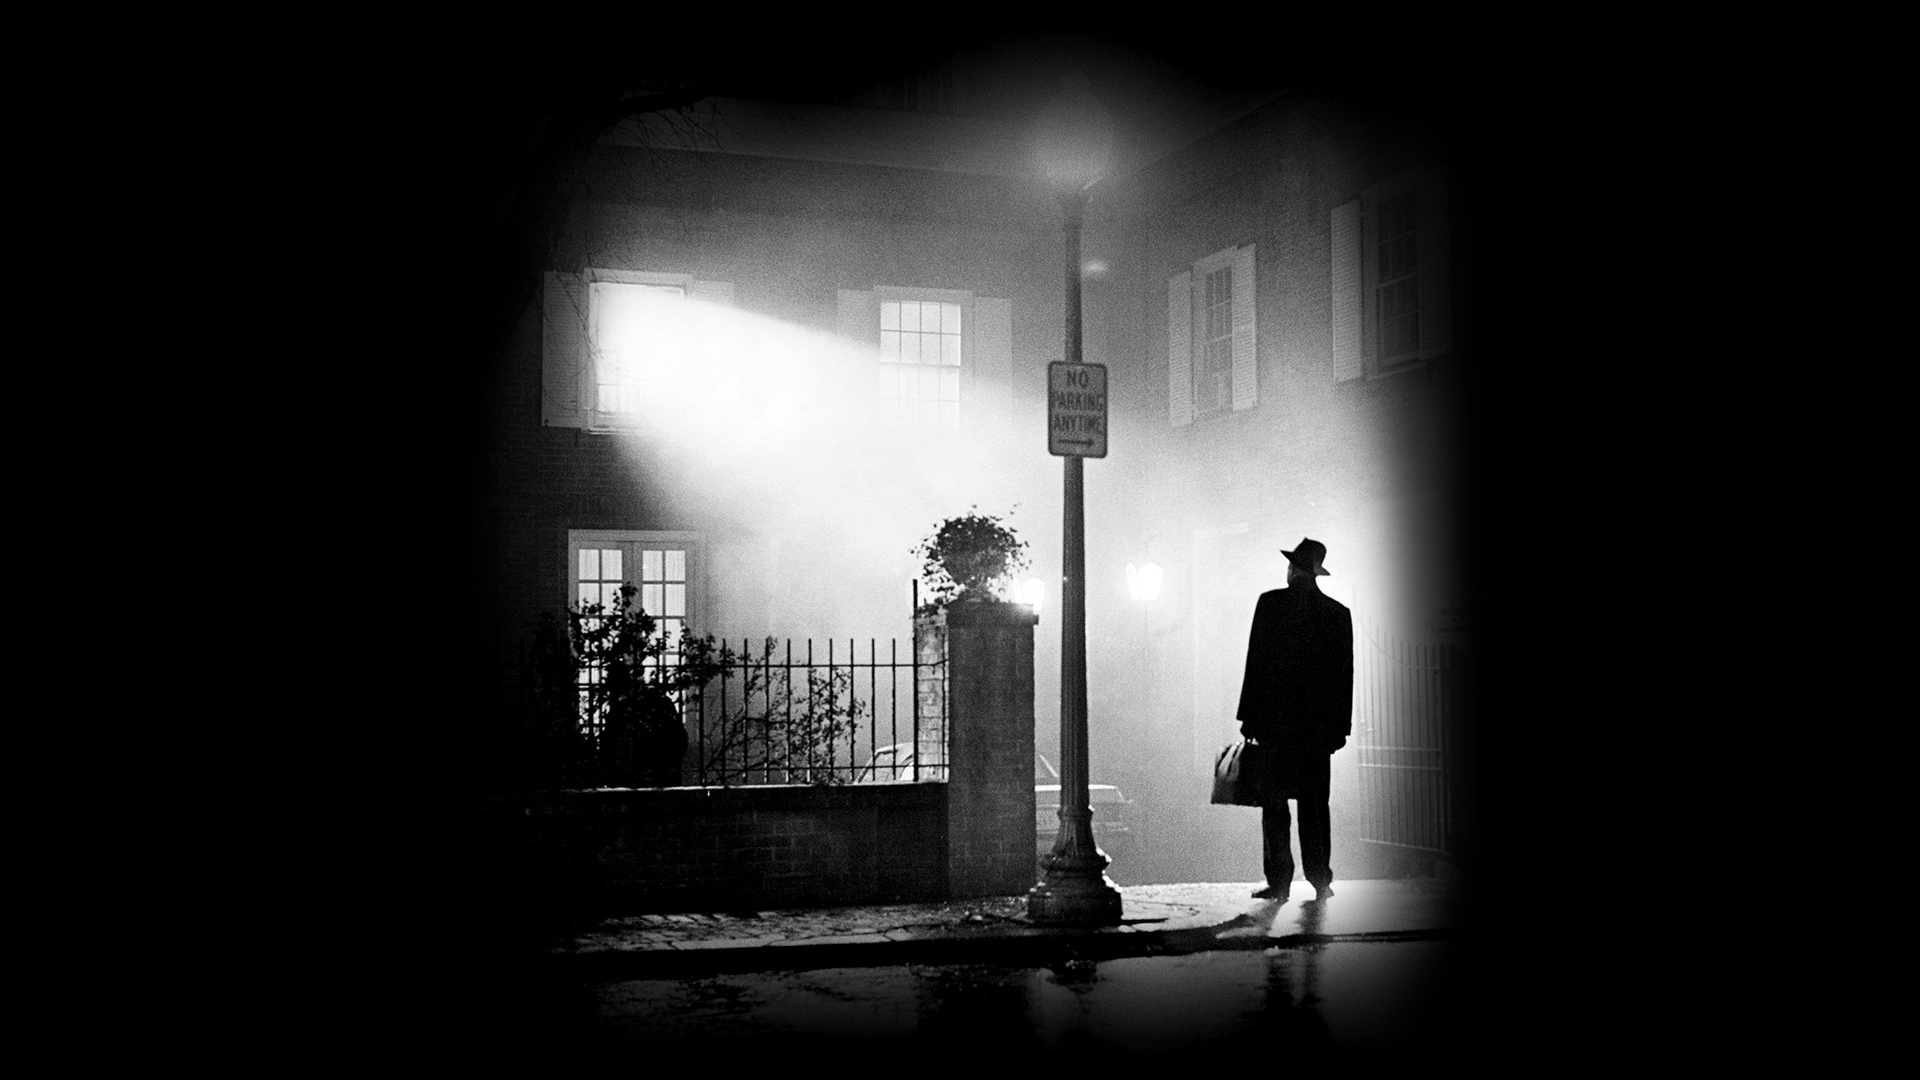 11 The Exorcist HD Wallpapers | Backgrounds - Wallpaper Abyss